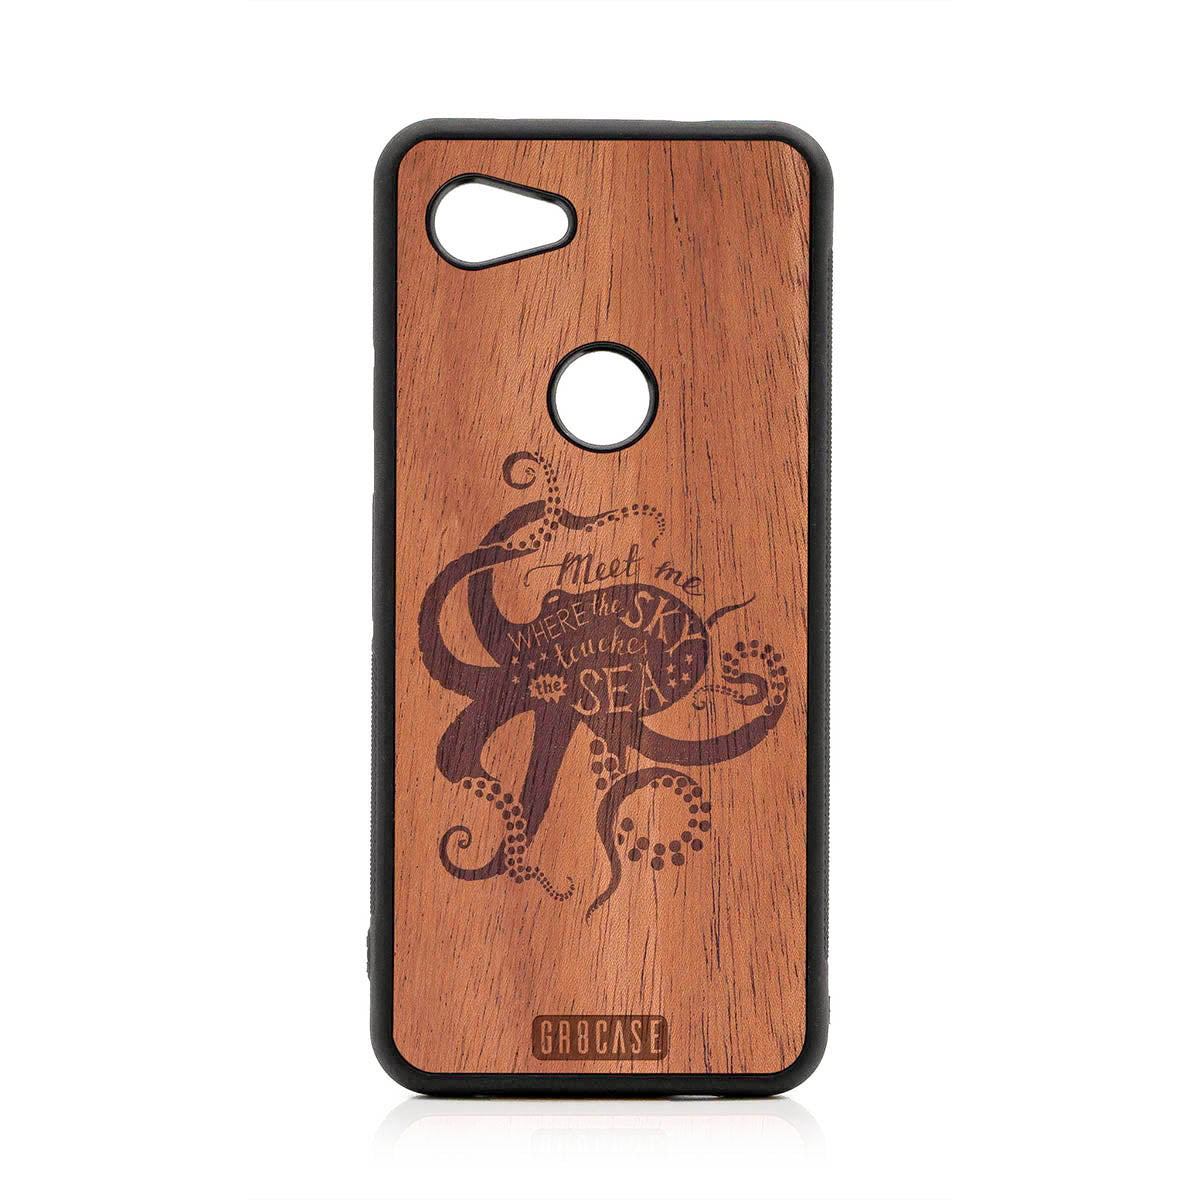 Meet Me Where The Sky Touches The Sea (Octopus) Design Wood Case For Google Pixel 3A XL